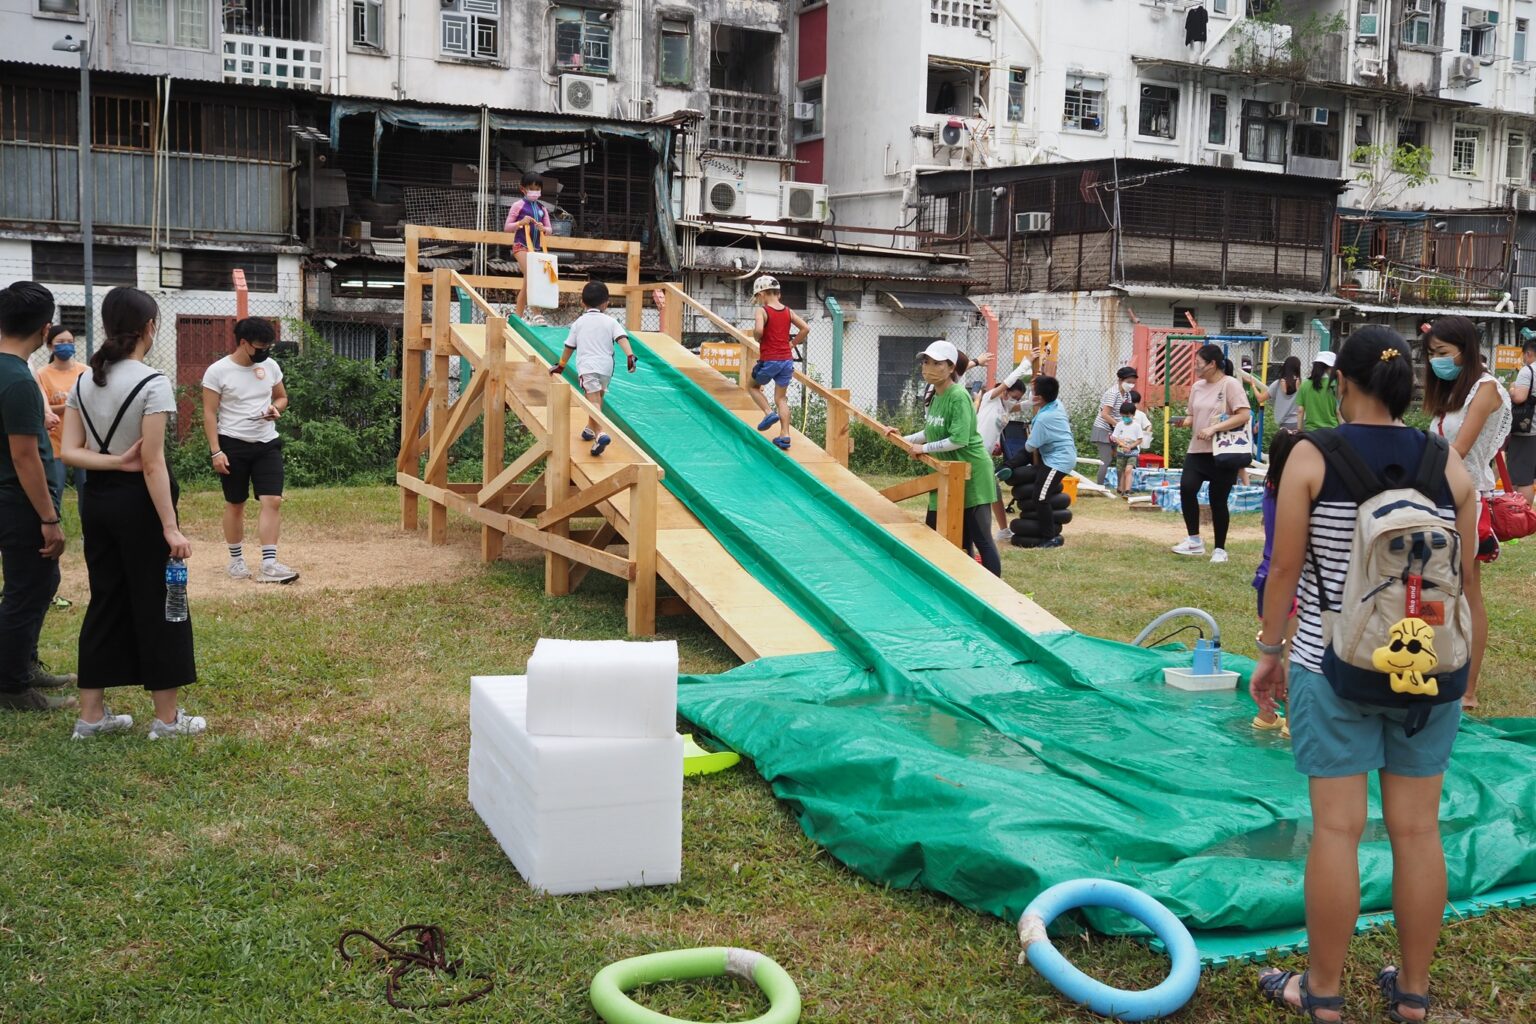 Smart pop-up playground for 2 in Hung Hom Hong Kong will have a 5-metre-high water slide